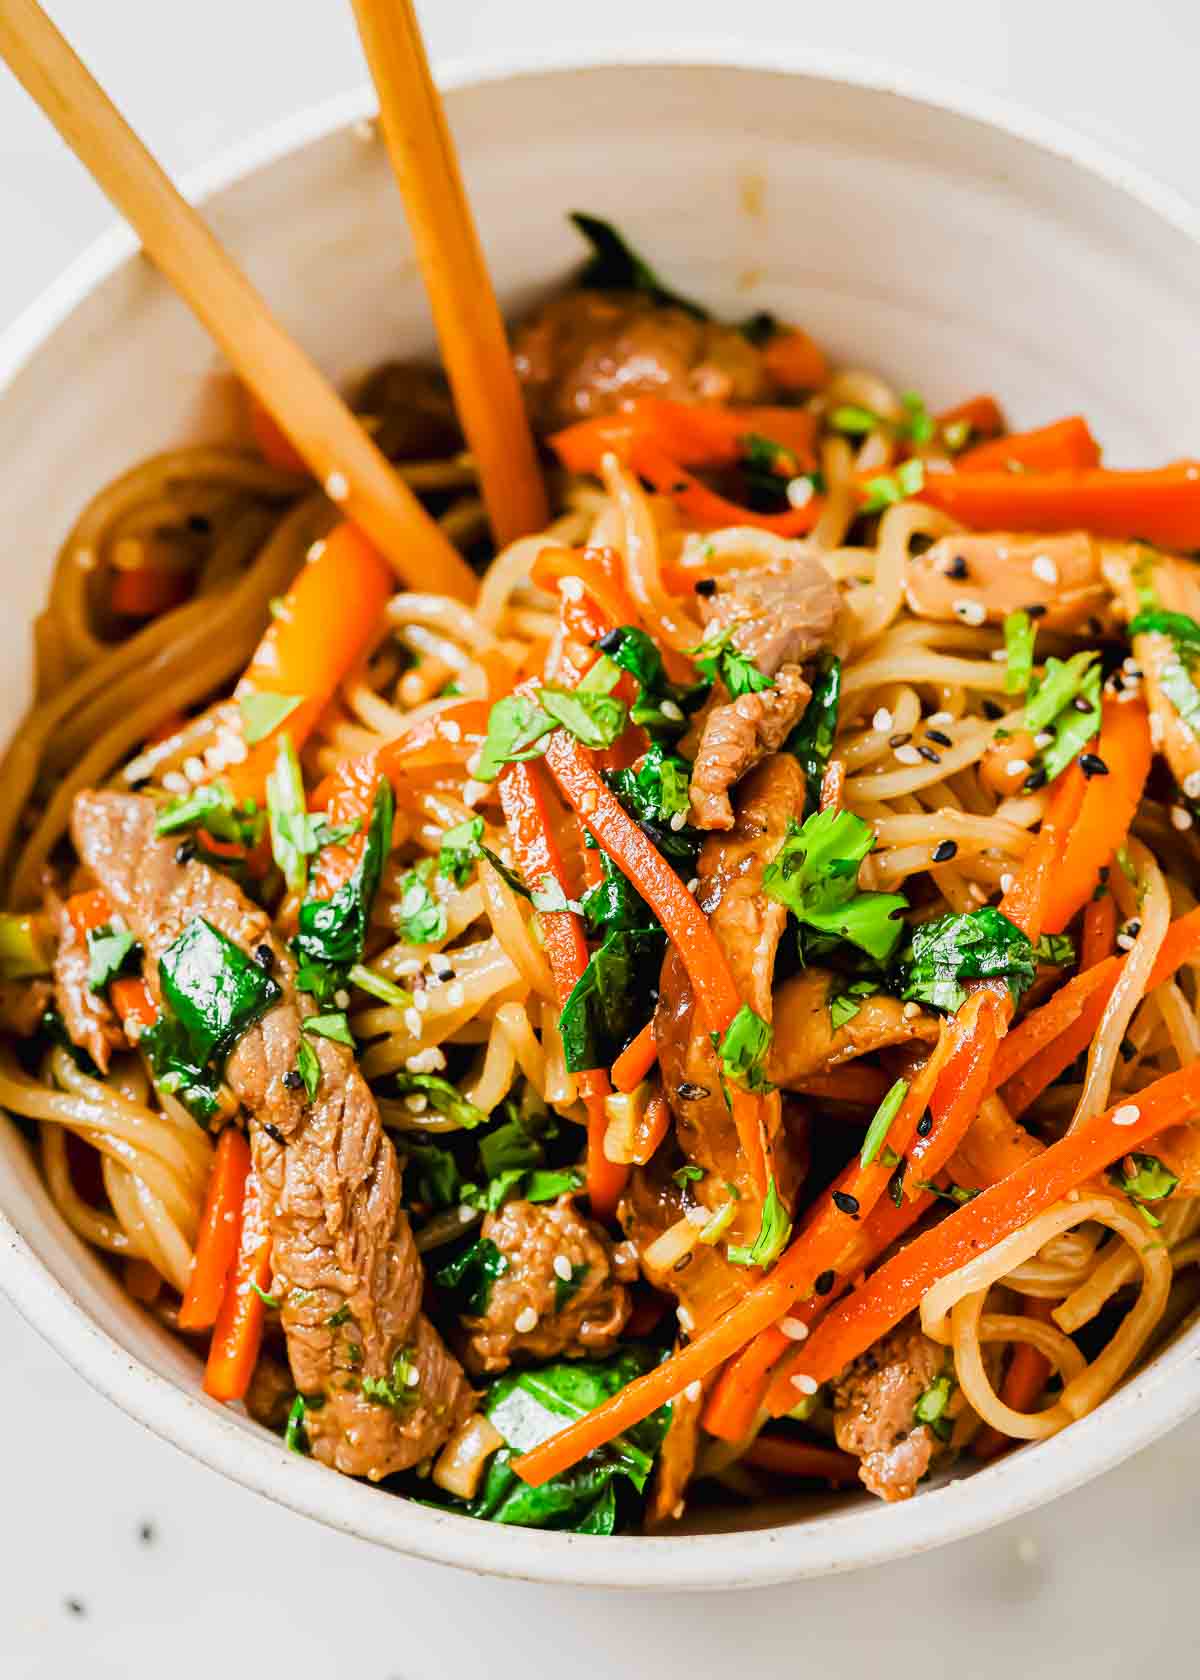 A bowl of sweet potato glass noodles with beef and vegetables.